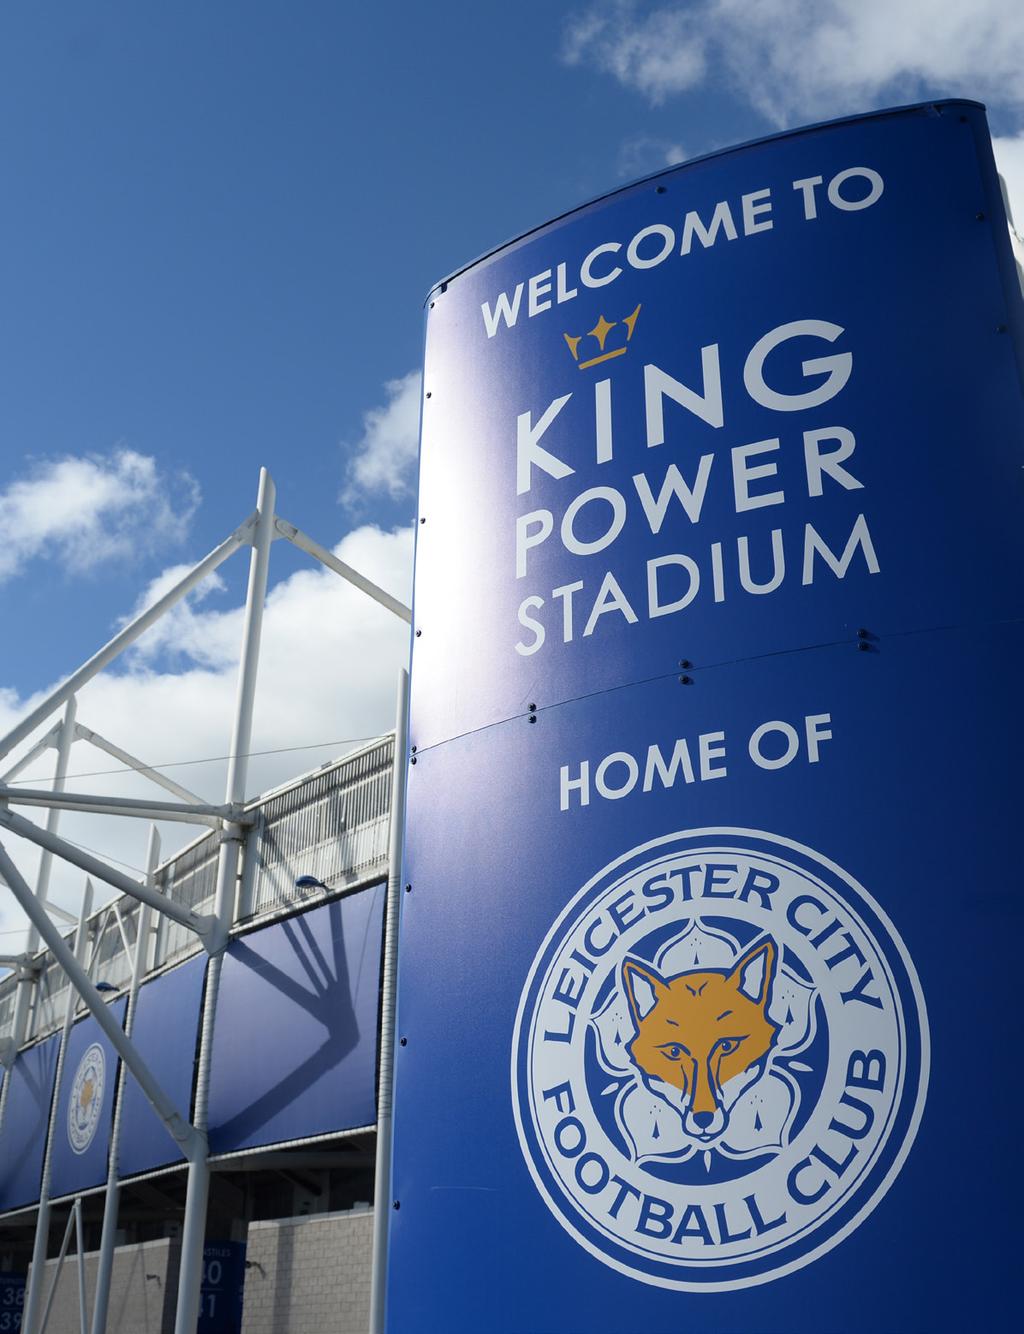 WELCOME TO LEICESTER CITY FOOTBALL CLUB CONTENTS WELCOME TO LCFC 3 SUPPORTERS WITH DISABILITIES 15 OUR COMMITMENT TO YOU 4 LCFC DSA 16 LEICESTER CITY FAN GROUPS 5 MATCHDAY HOSPITALITY 17 SAFETY